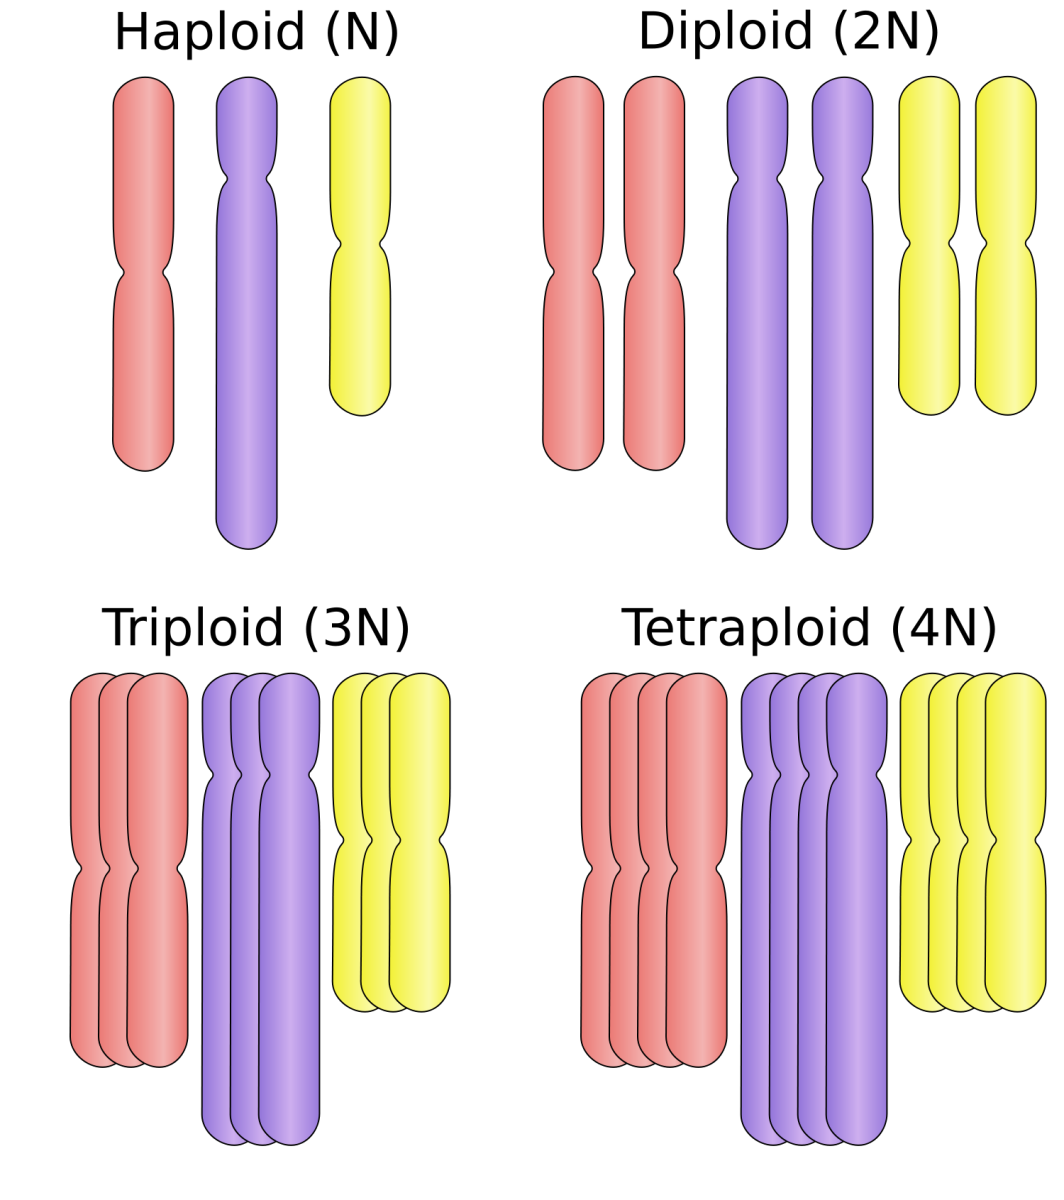 Haploid organisms carry only one copy of each chromosome - this is the genetic profile of a honeybee drone. Humans and most other animals are diploid, and carry two copies of each chromosome. Parthenogenesis is possible for both conditions.